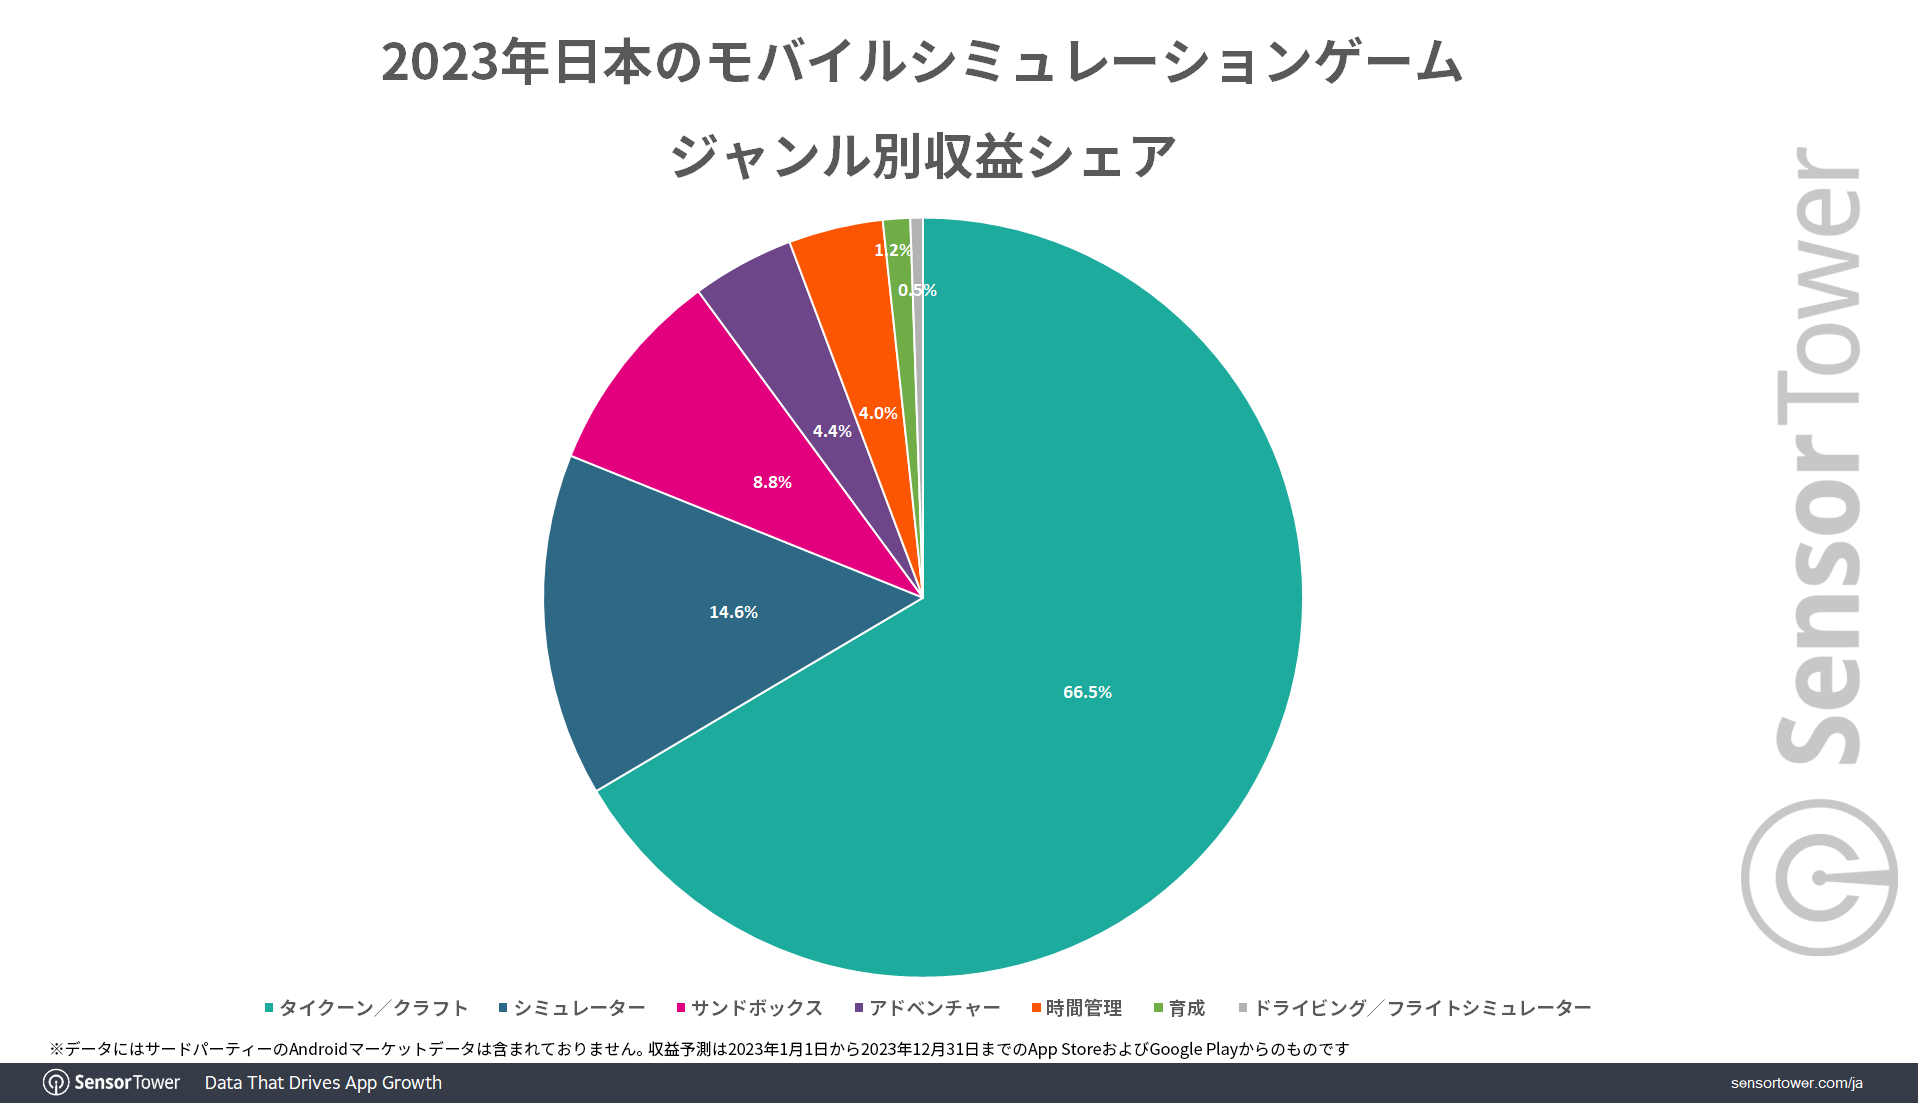 Similation-Game-Share-by-Genre-Japan